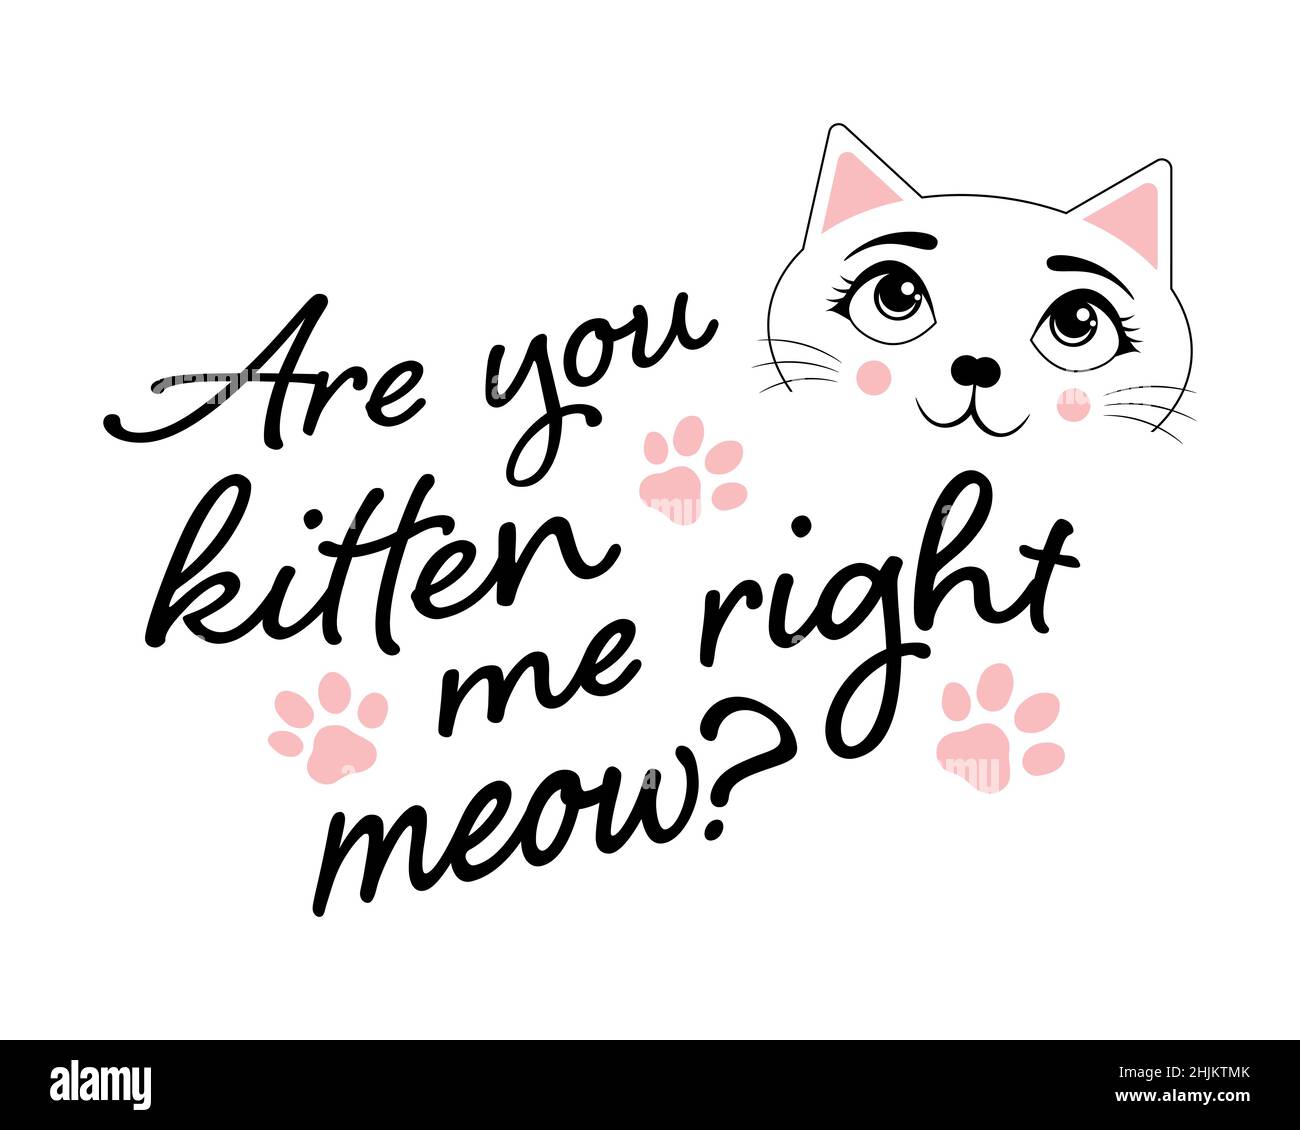 Are you kitten me right meow? Cat with paw icons and text on a white background. Stock Vector